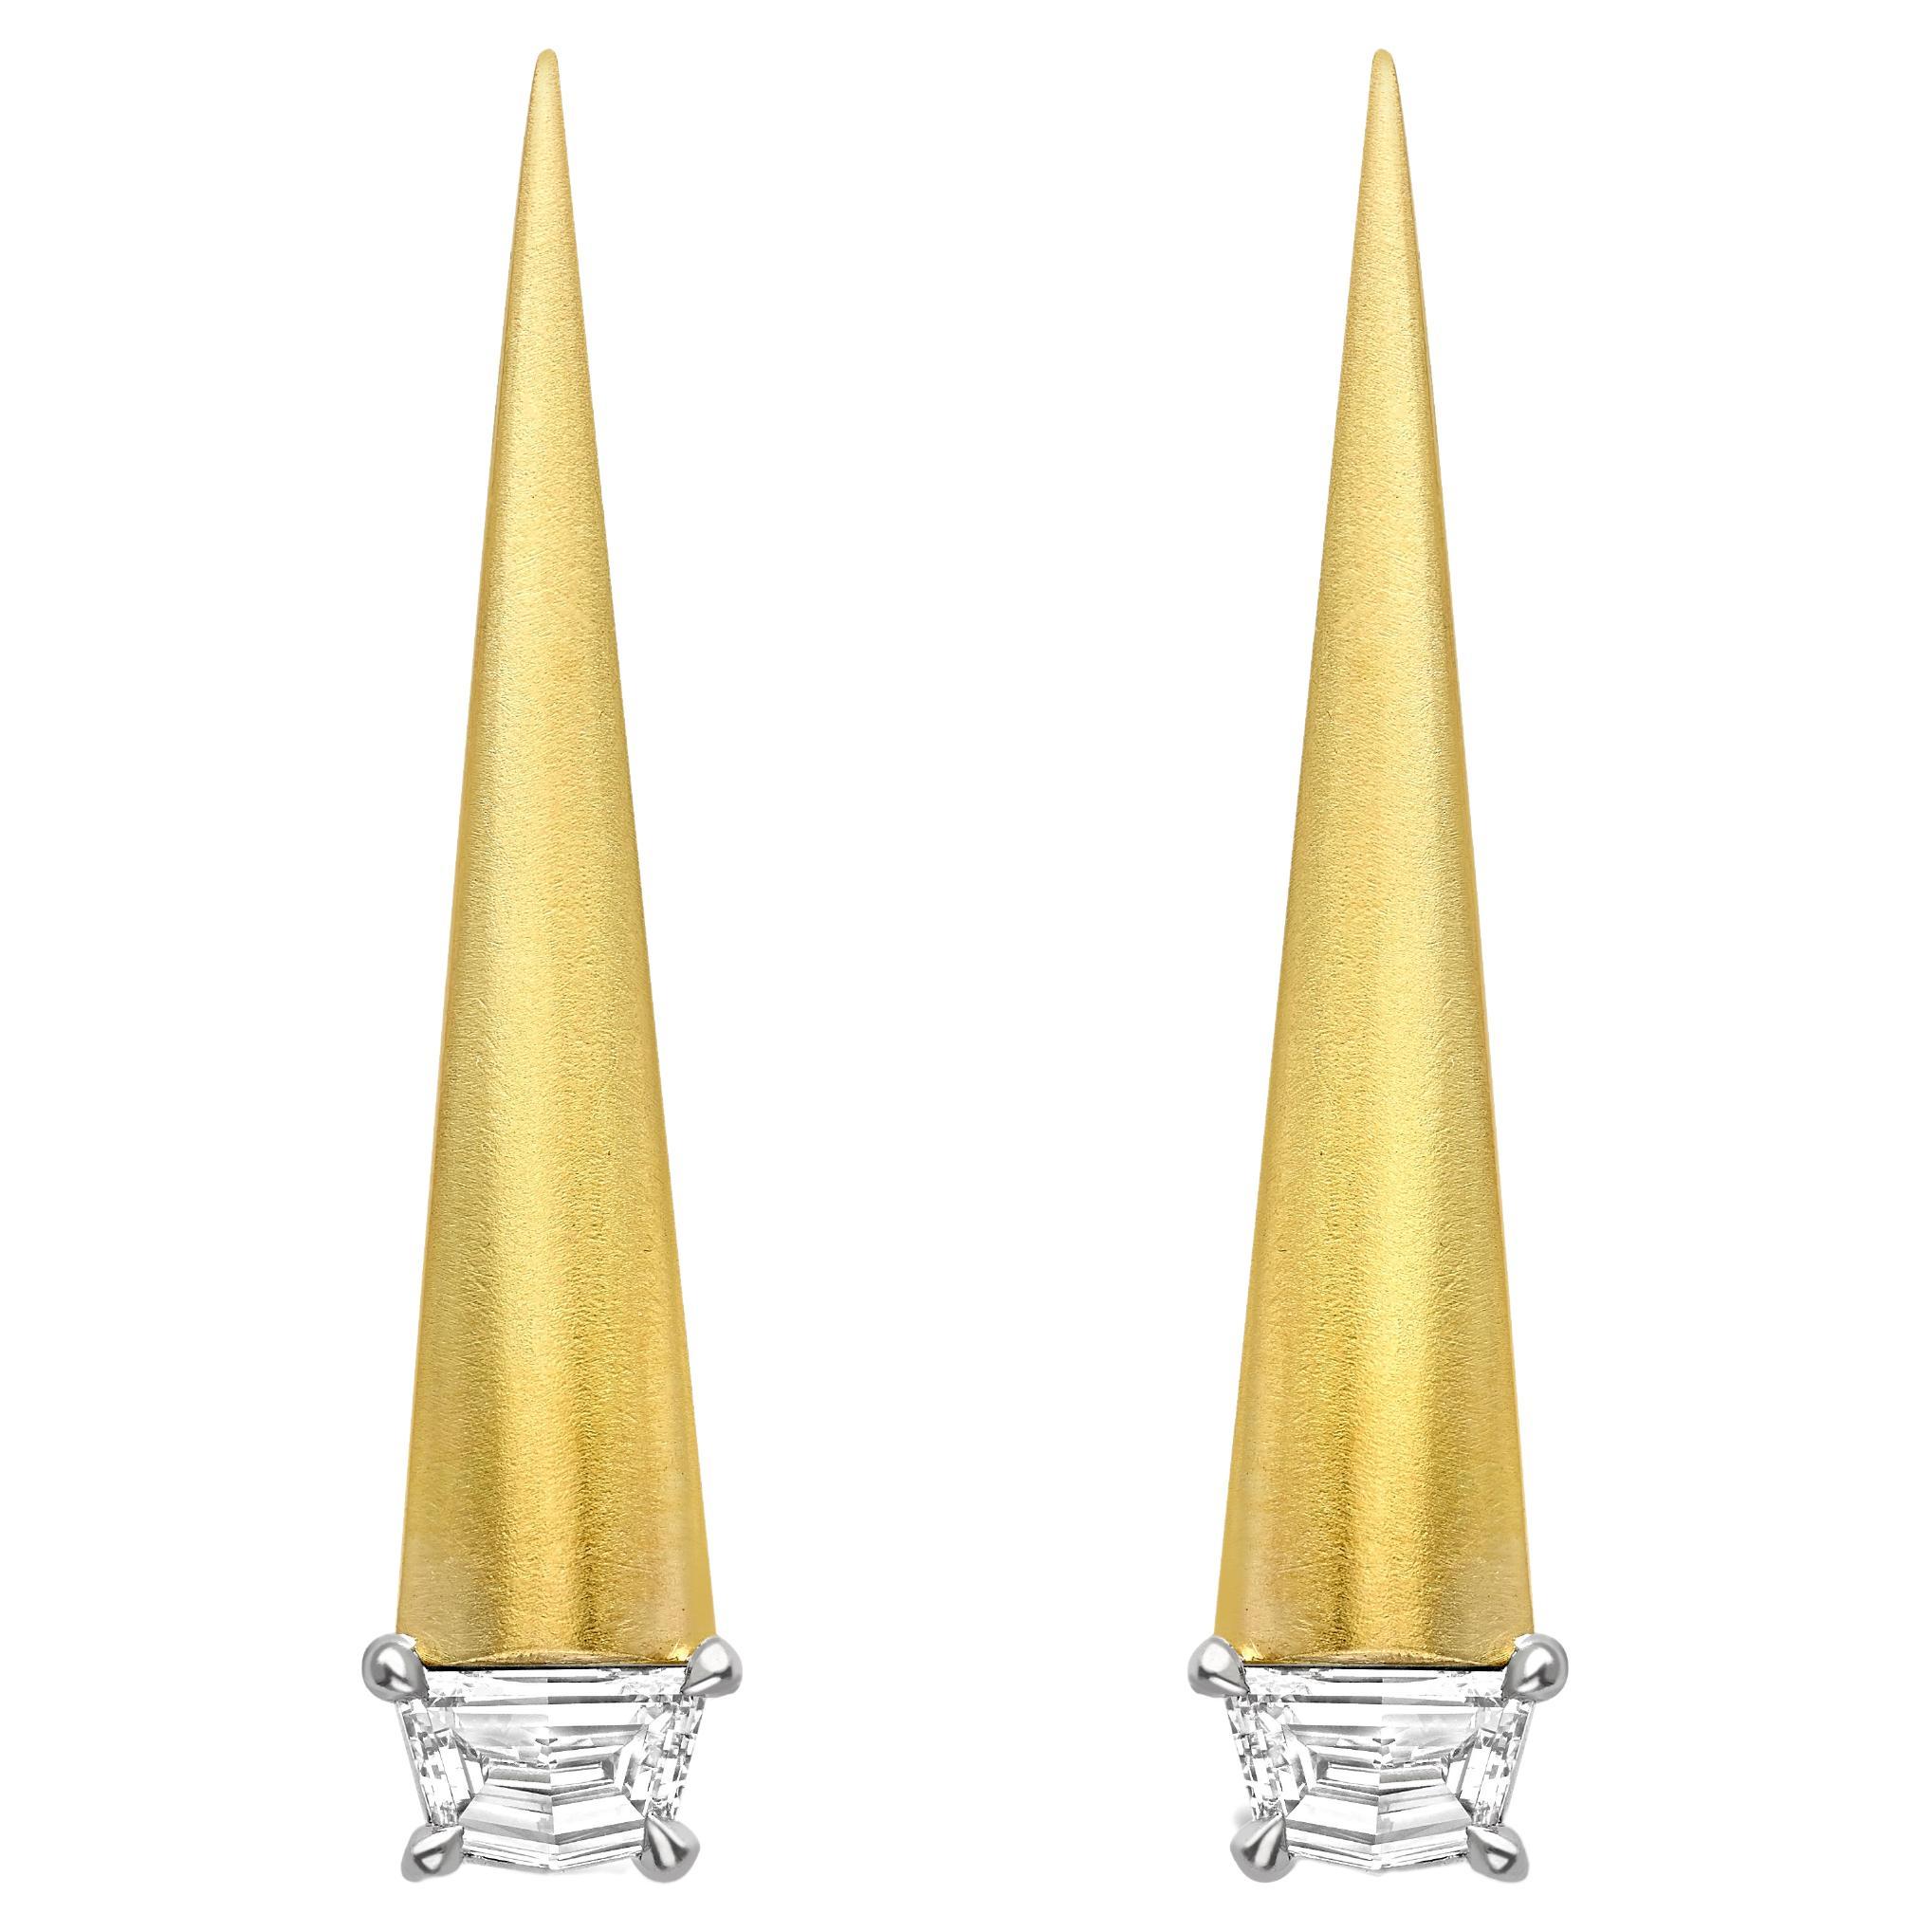 SPEAR TIP EARRINGS Yellow gold with Cadillac cut diamonds by Liv Luttrell For Sale